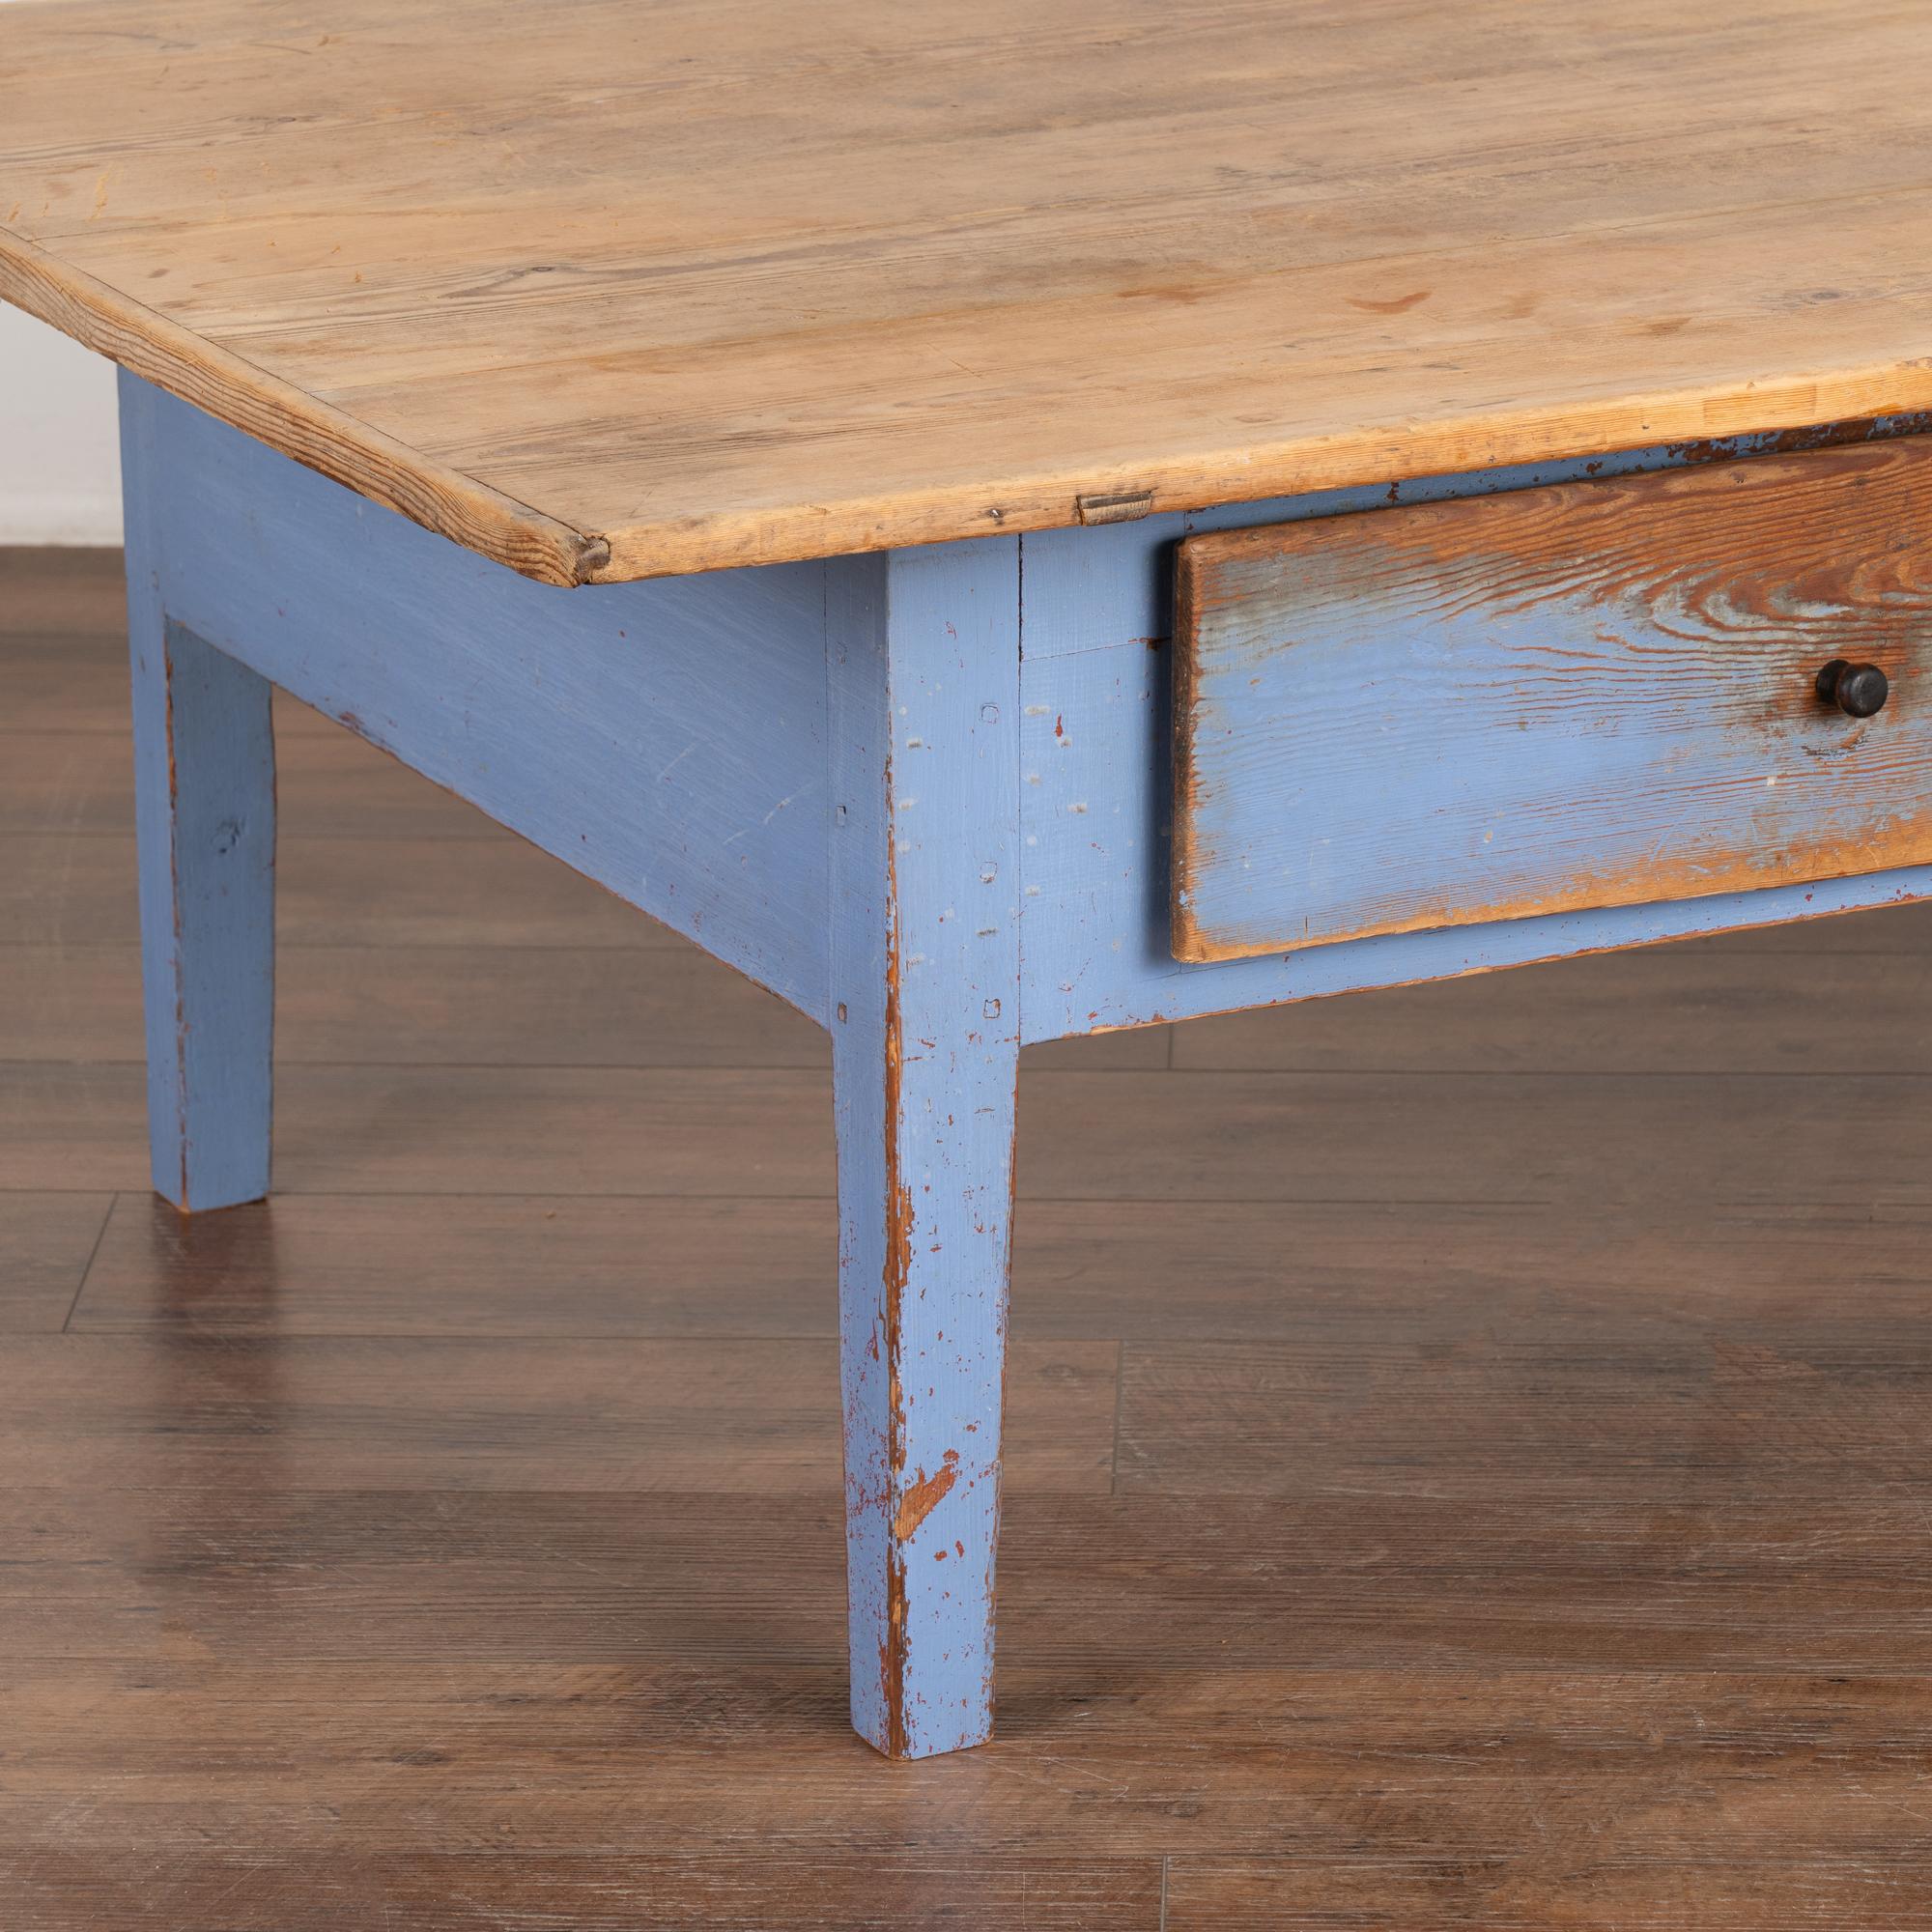 Swedish Rustic Blue Painted Pine Coffee Table With Two Drawers, Sweden circa 1860-80